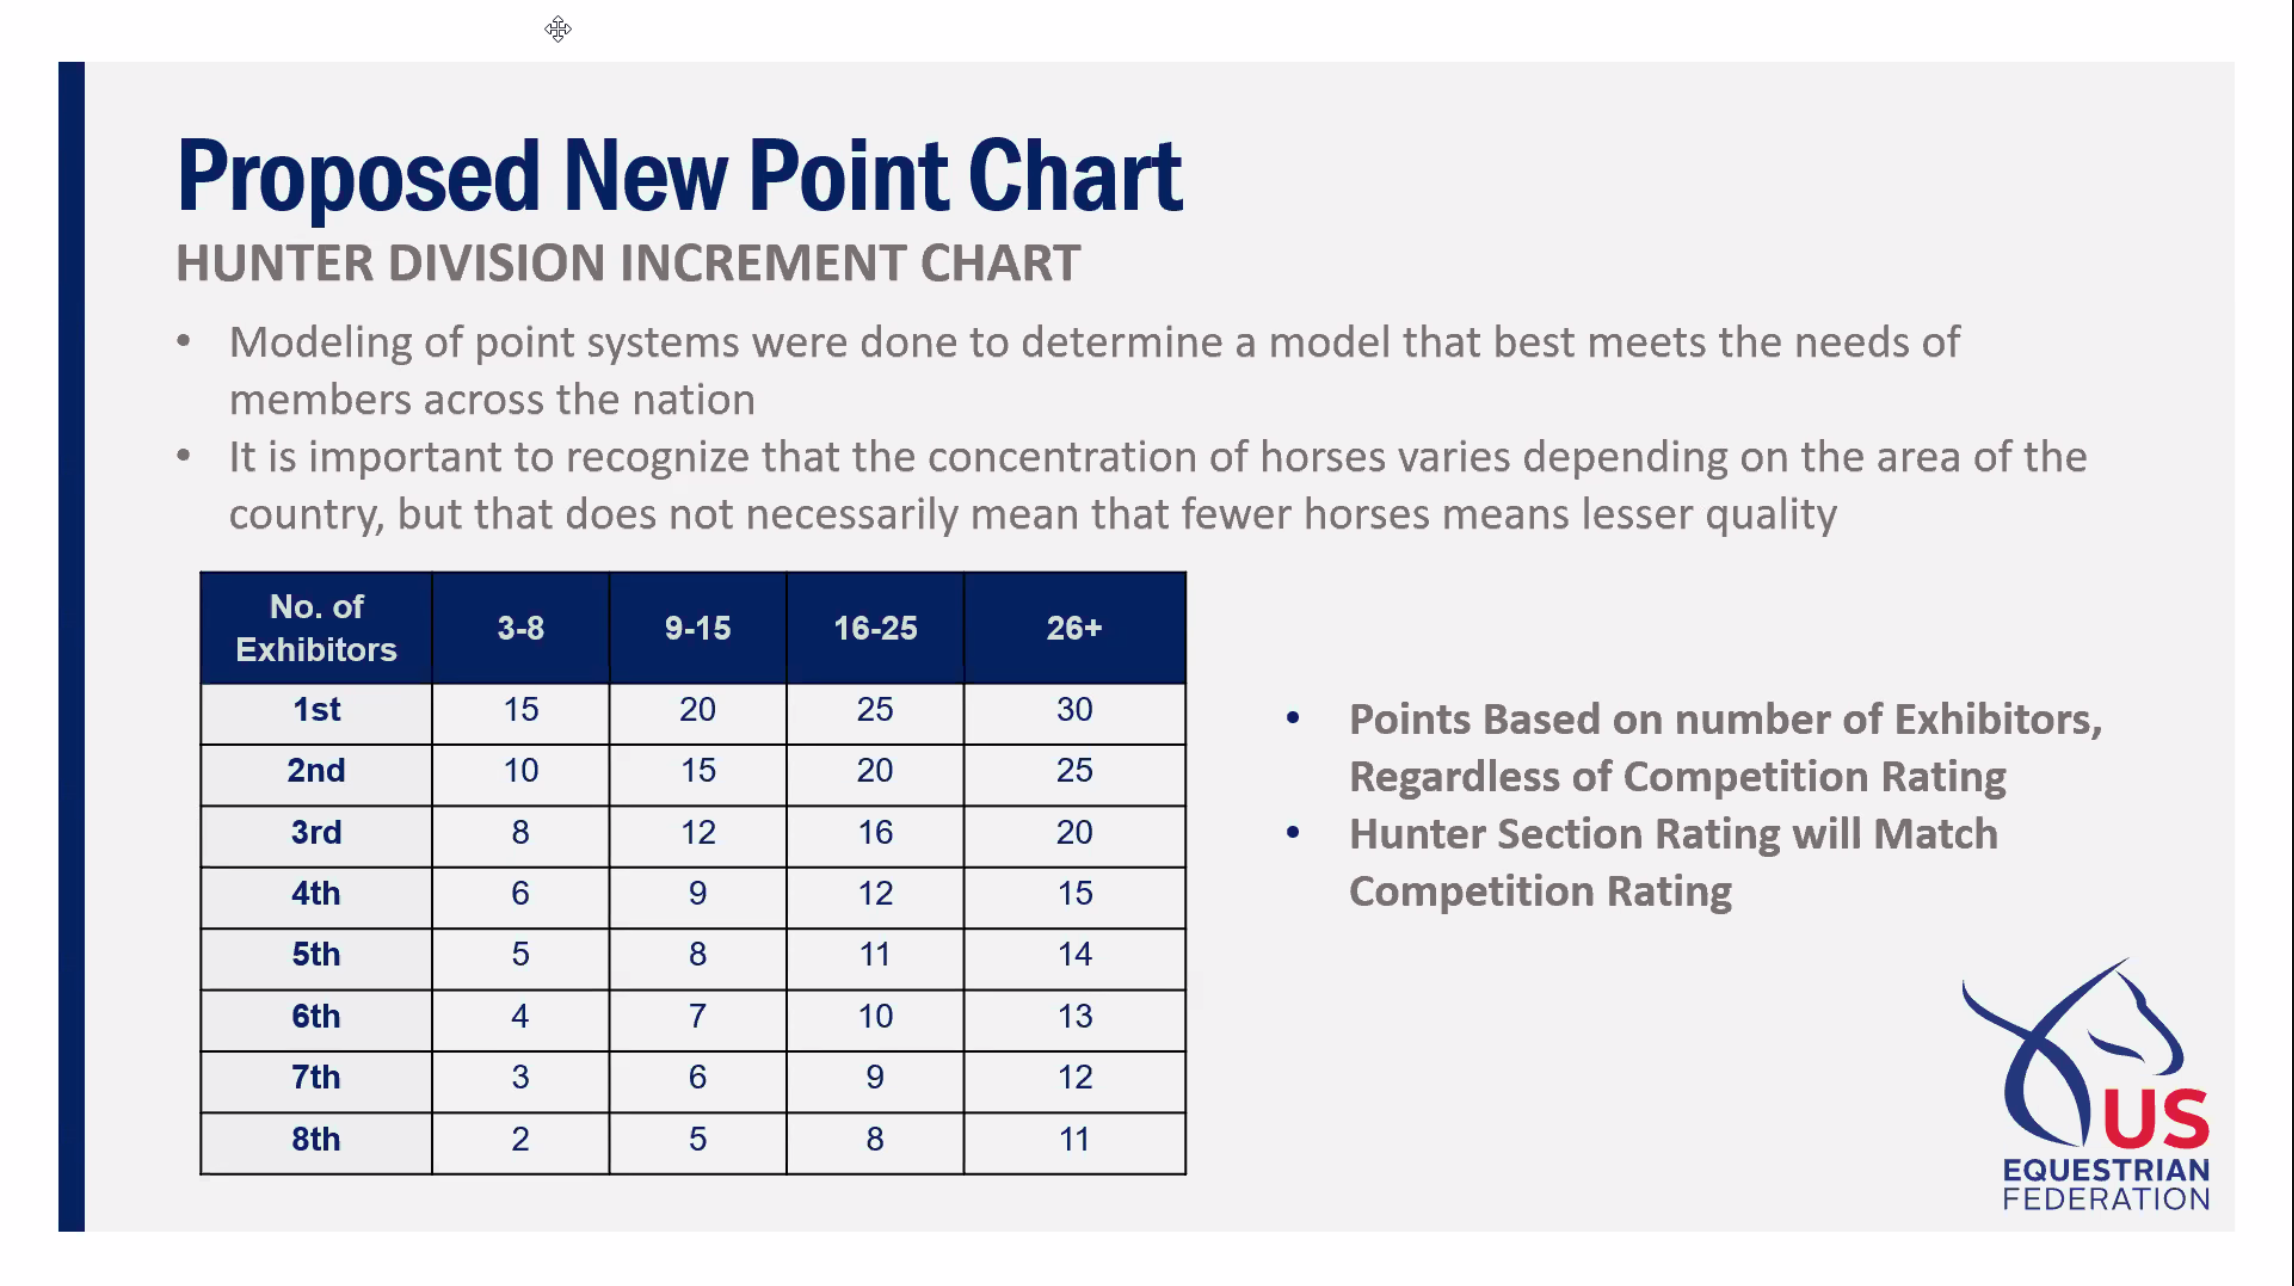 *Proposed new point chart